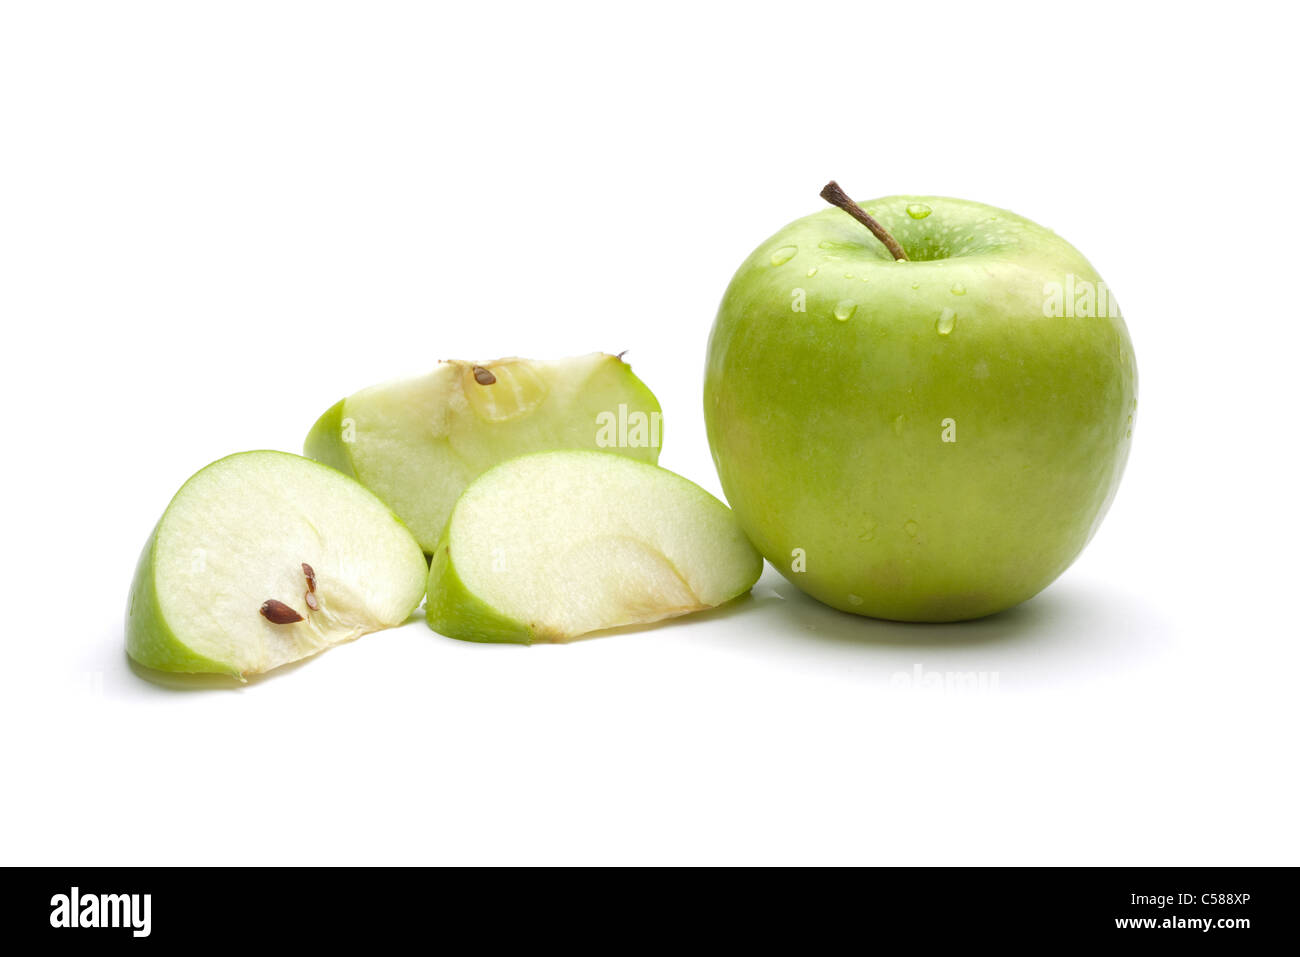 Picture of green uncut apple and apple sliced Stock Photo